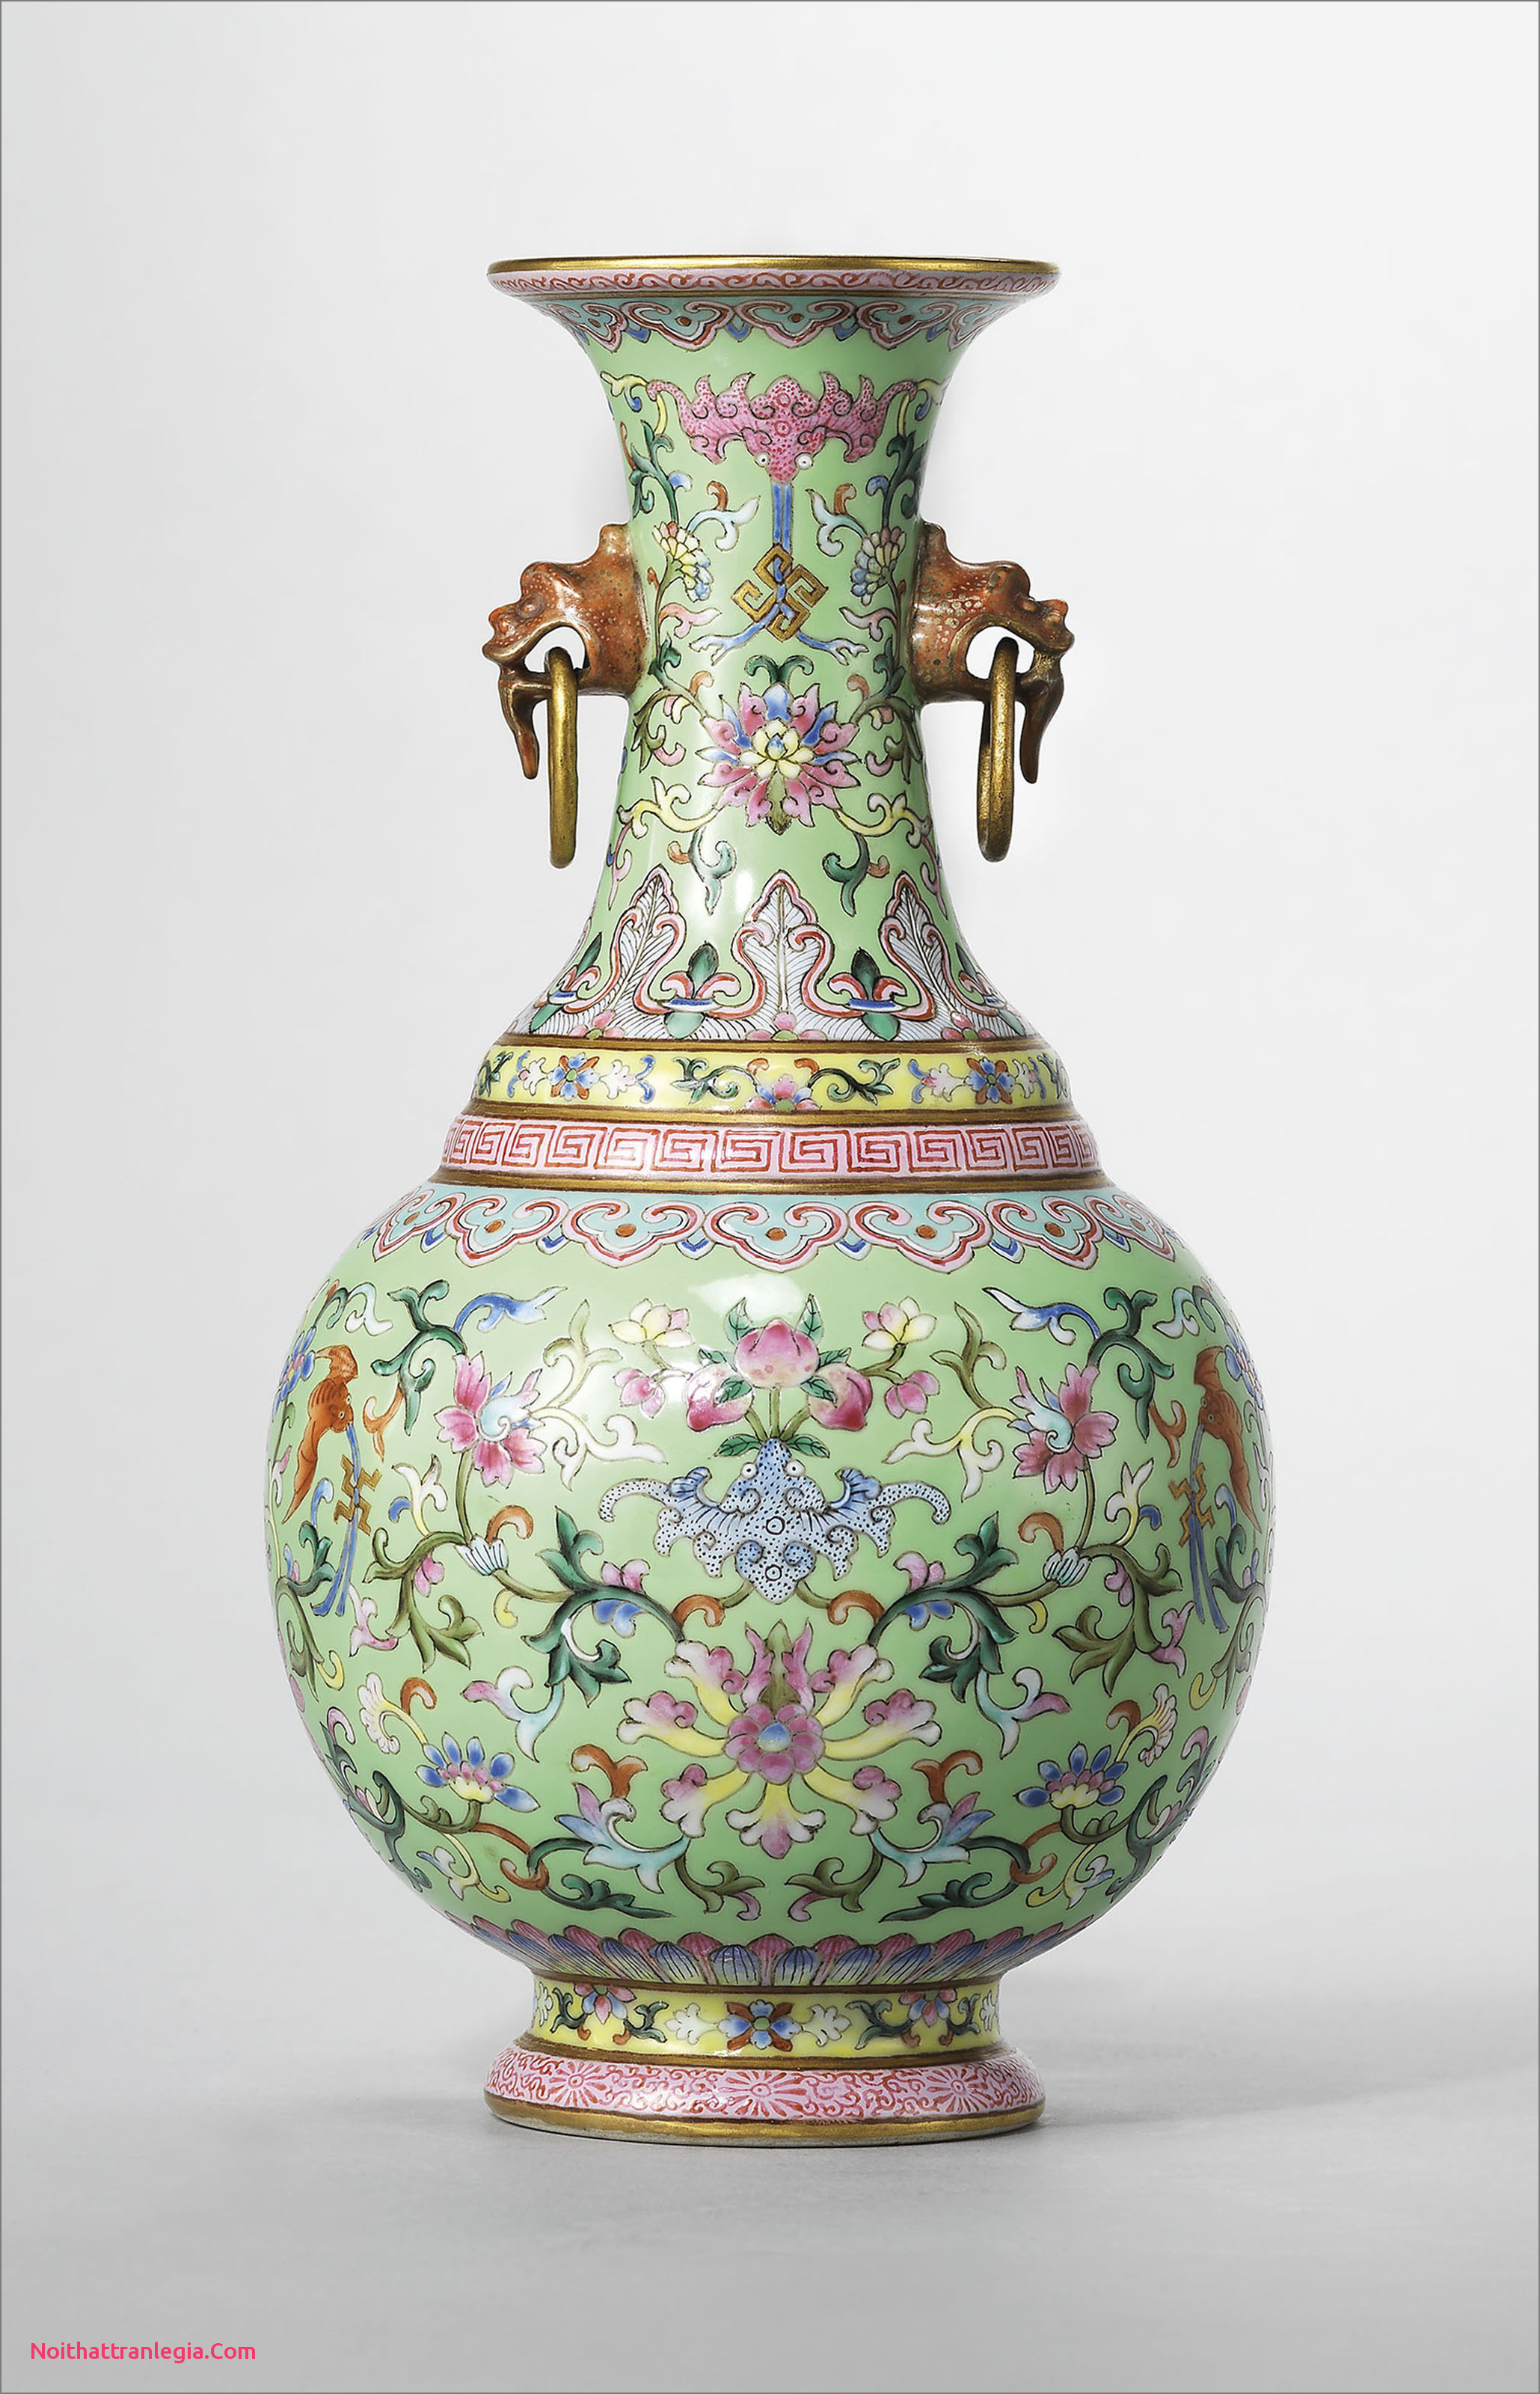 27 Awesome Japanese Ceramic Vase 2024 free download japanese ceramic vase of 20 chinese antique vase noithattranlegia vases design with a lime green ground famille rose twin handled vase jiaqing six character